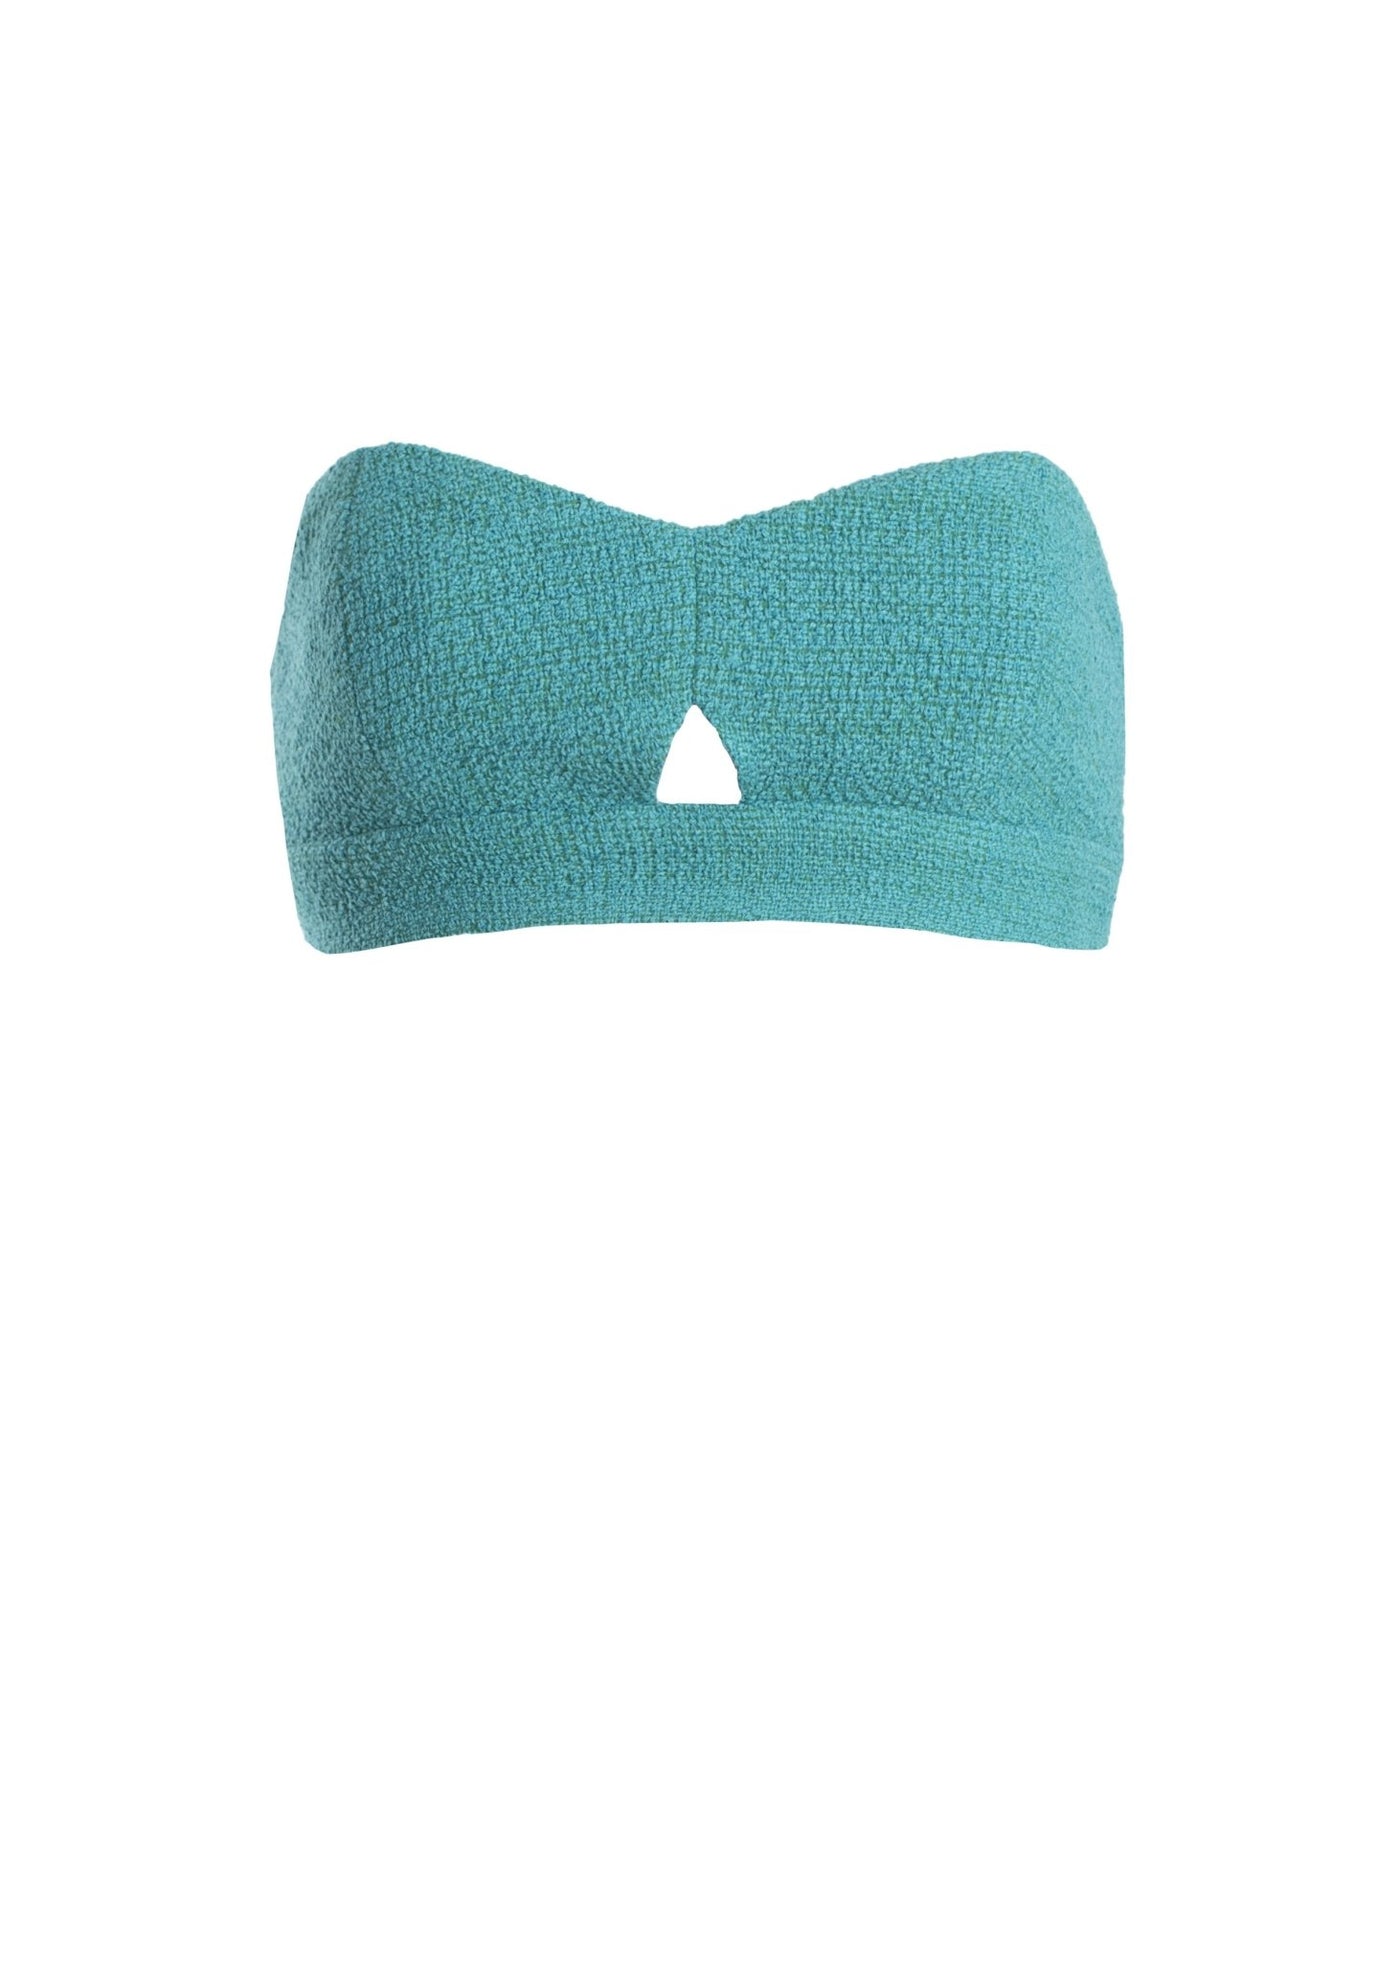 Blue Bandeau Top - The Clothing LoungeNOPIN